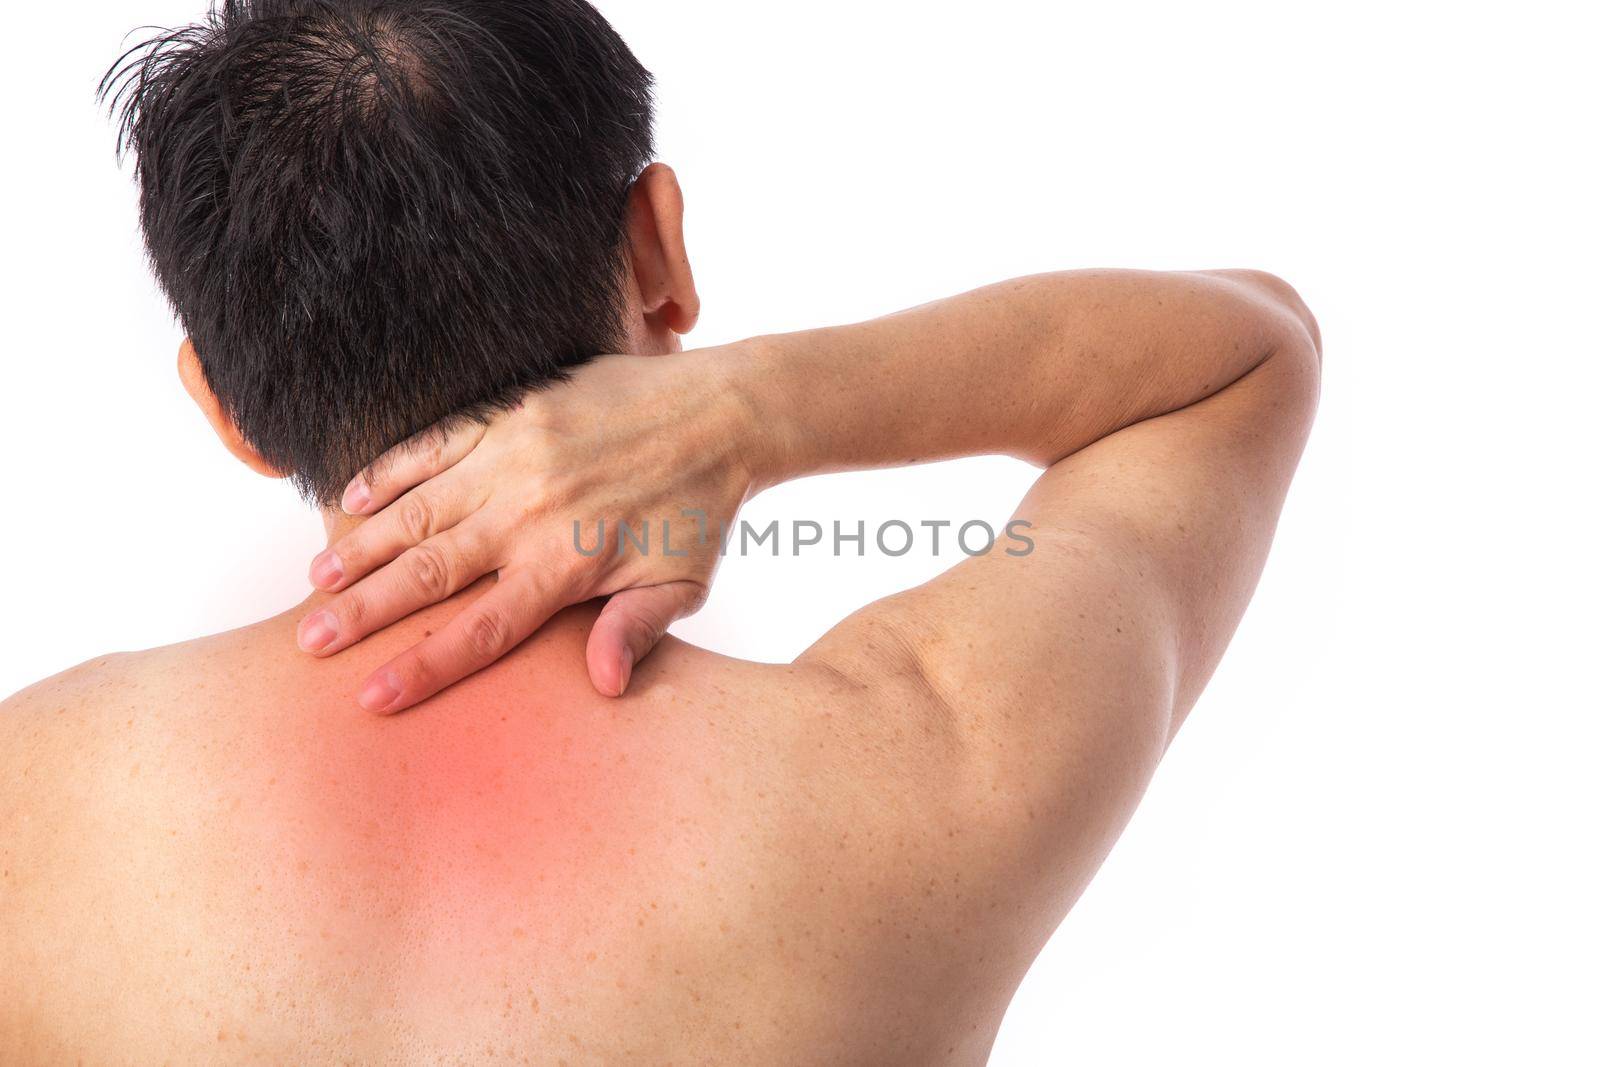 Sore pain of neck. Sprain and arthritis symptoms. middle age man holding his hurt neck over white background.